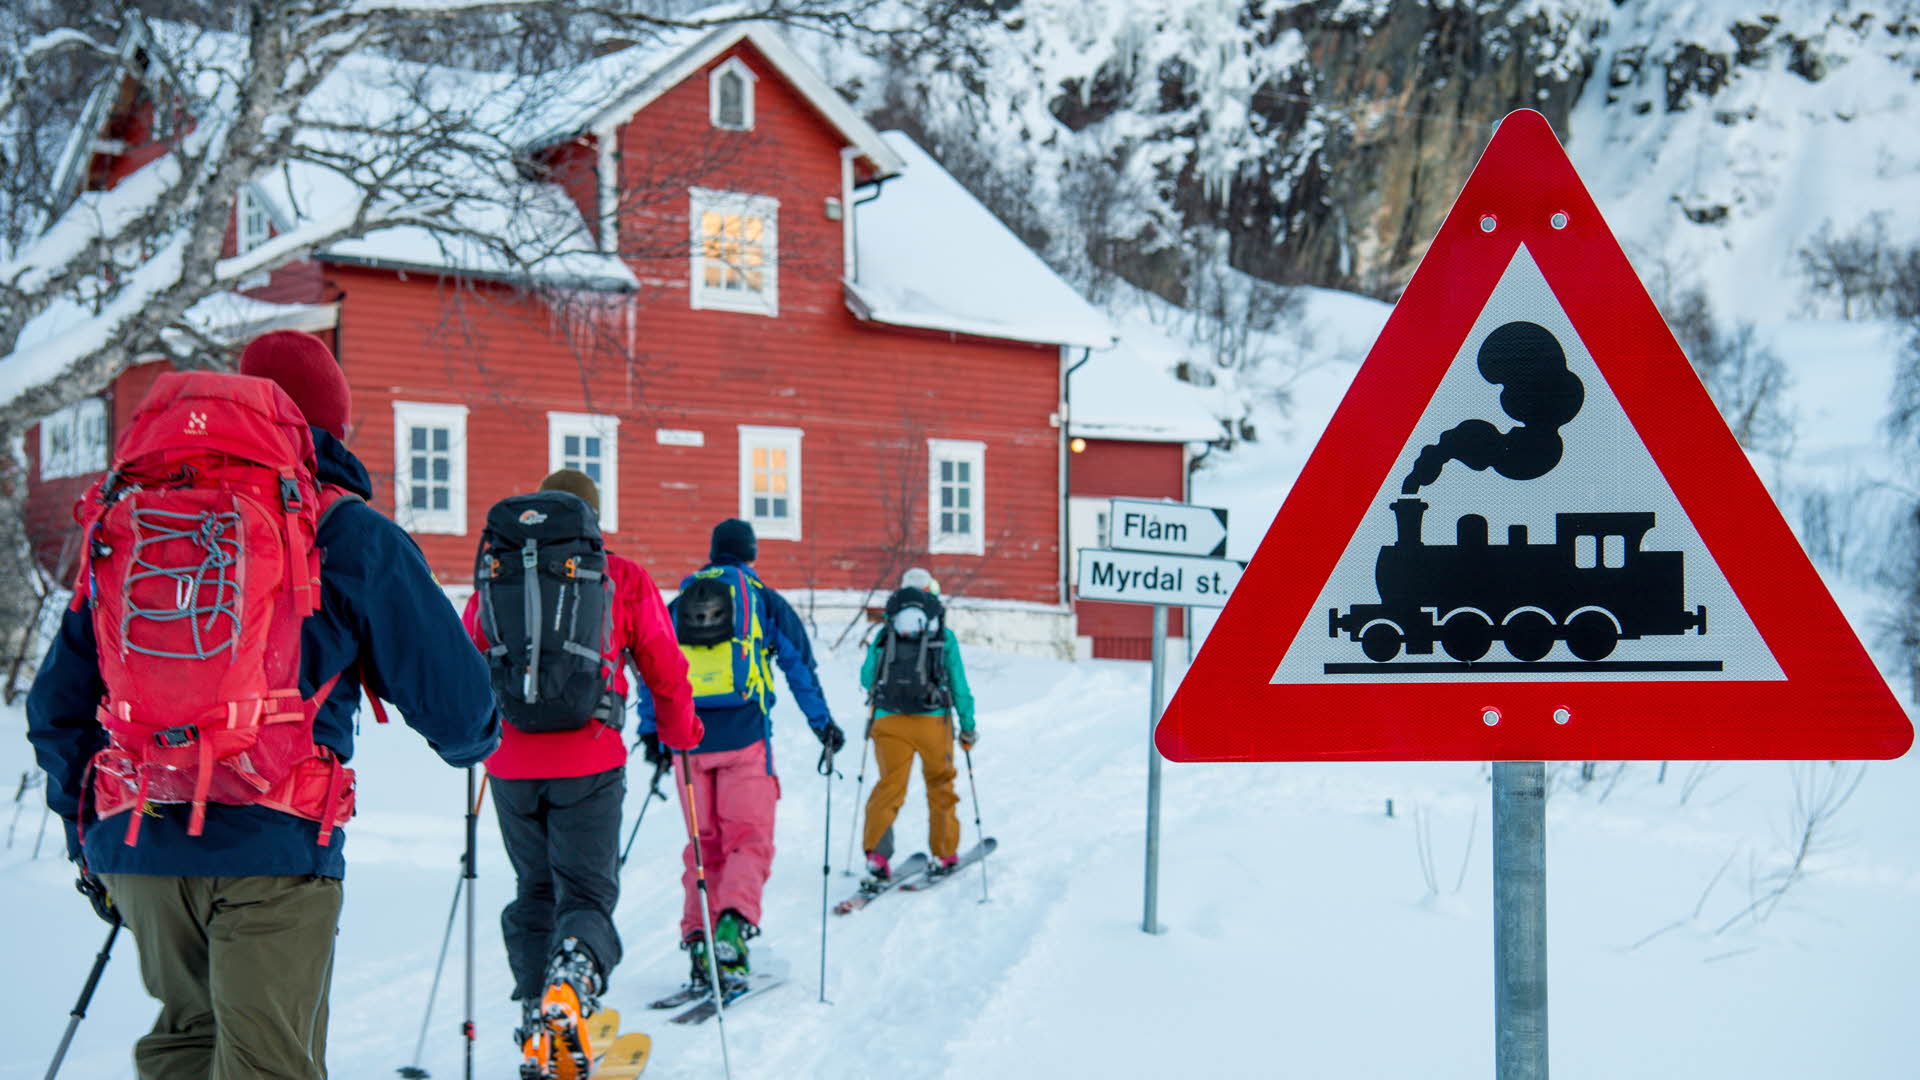 Four Randonnée skiers on their way towards red guest house at Vatnhalsen passing the flam railroad warning sign in winter